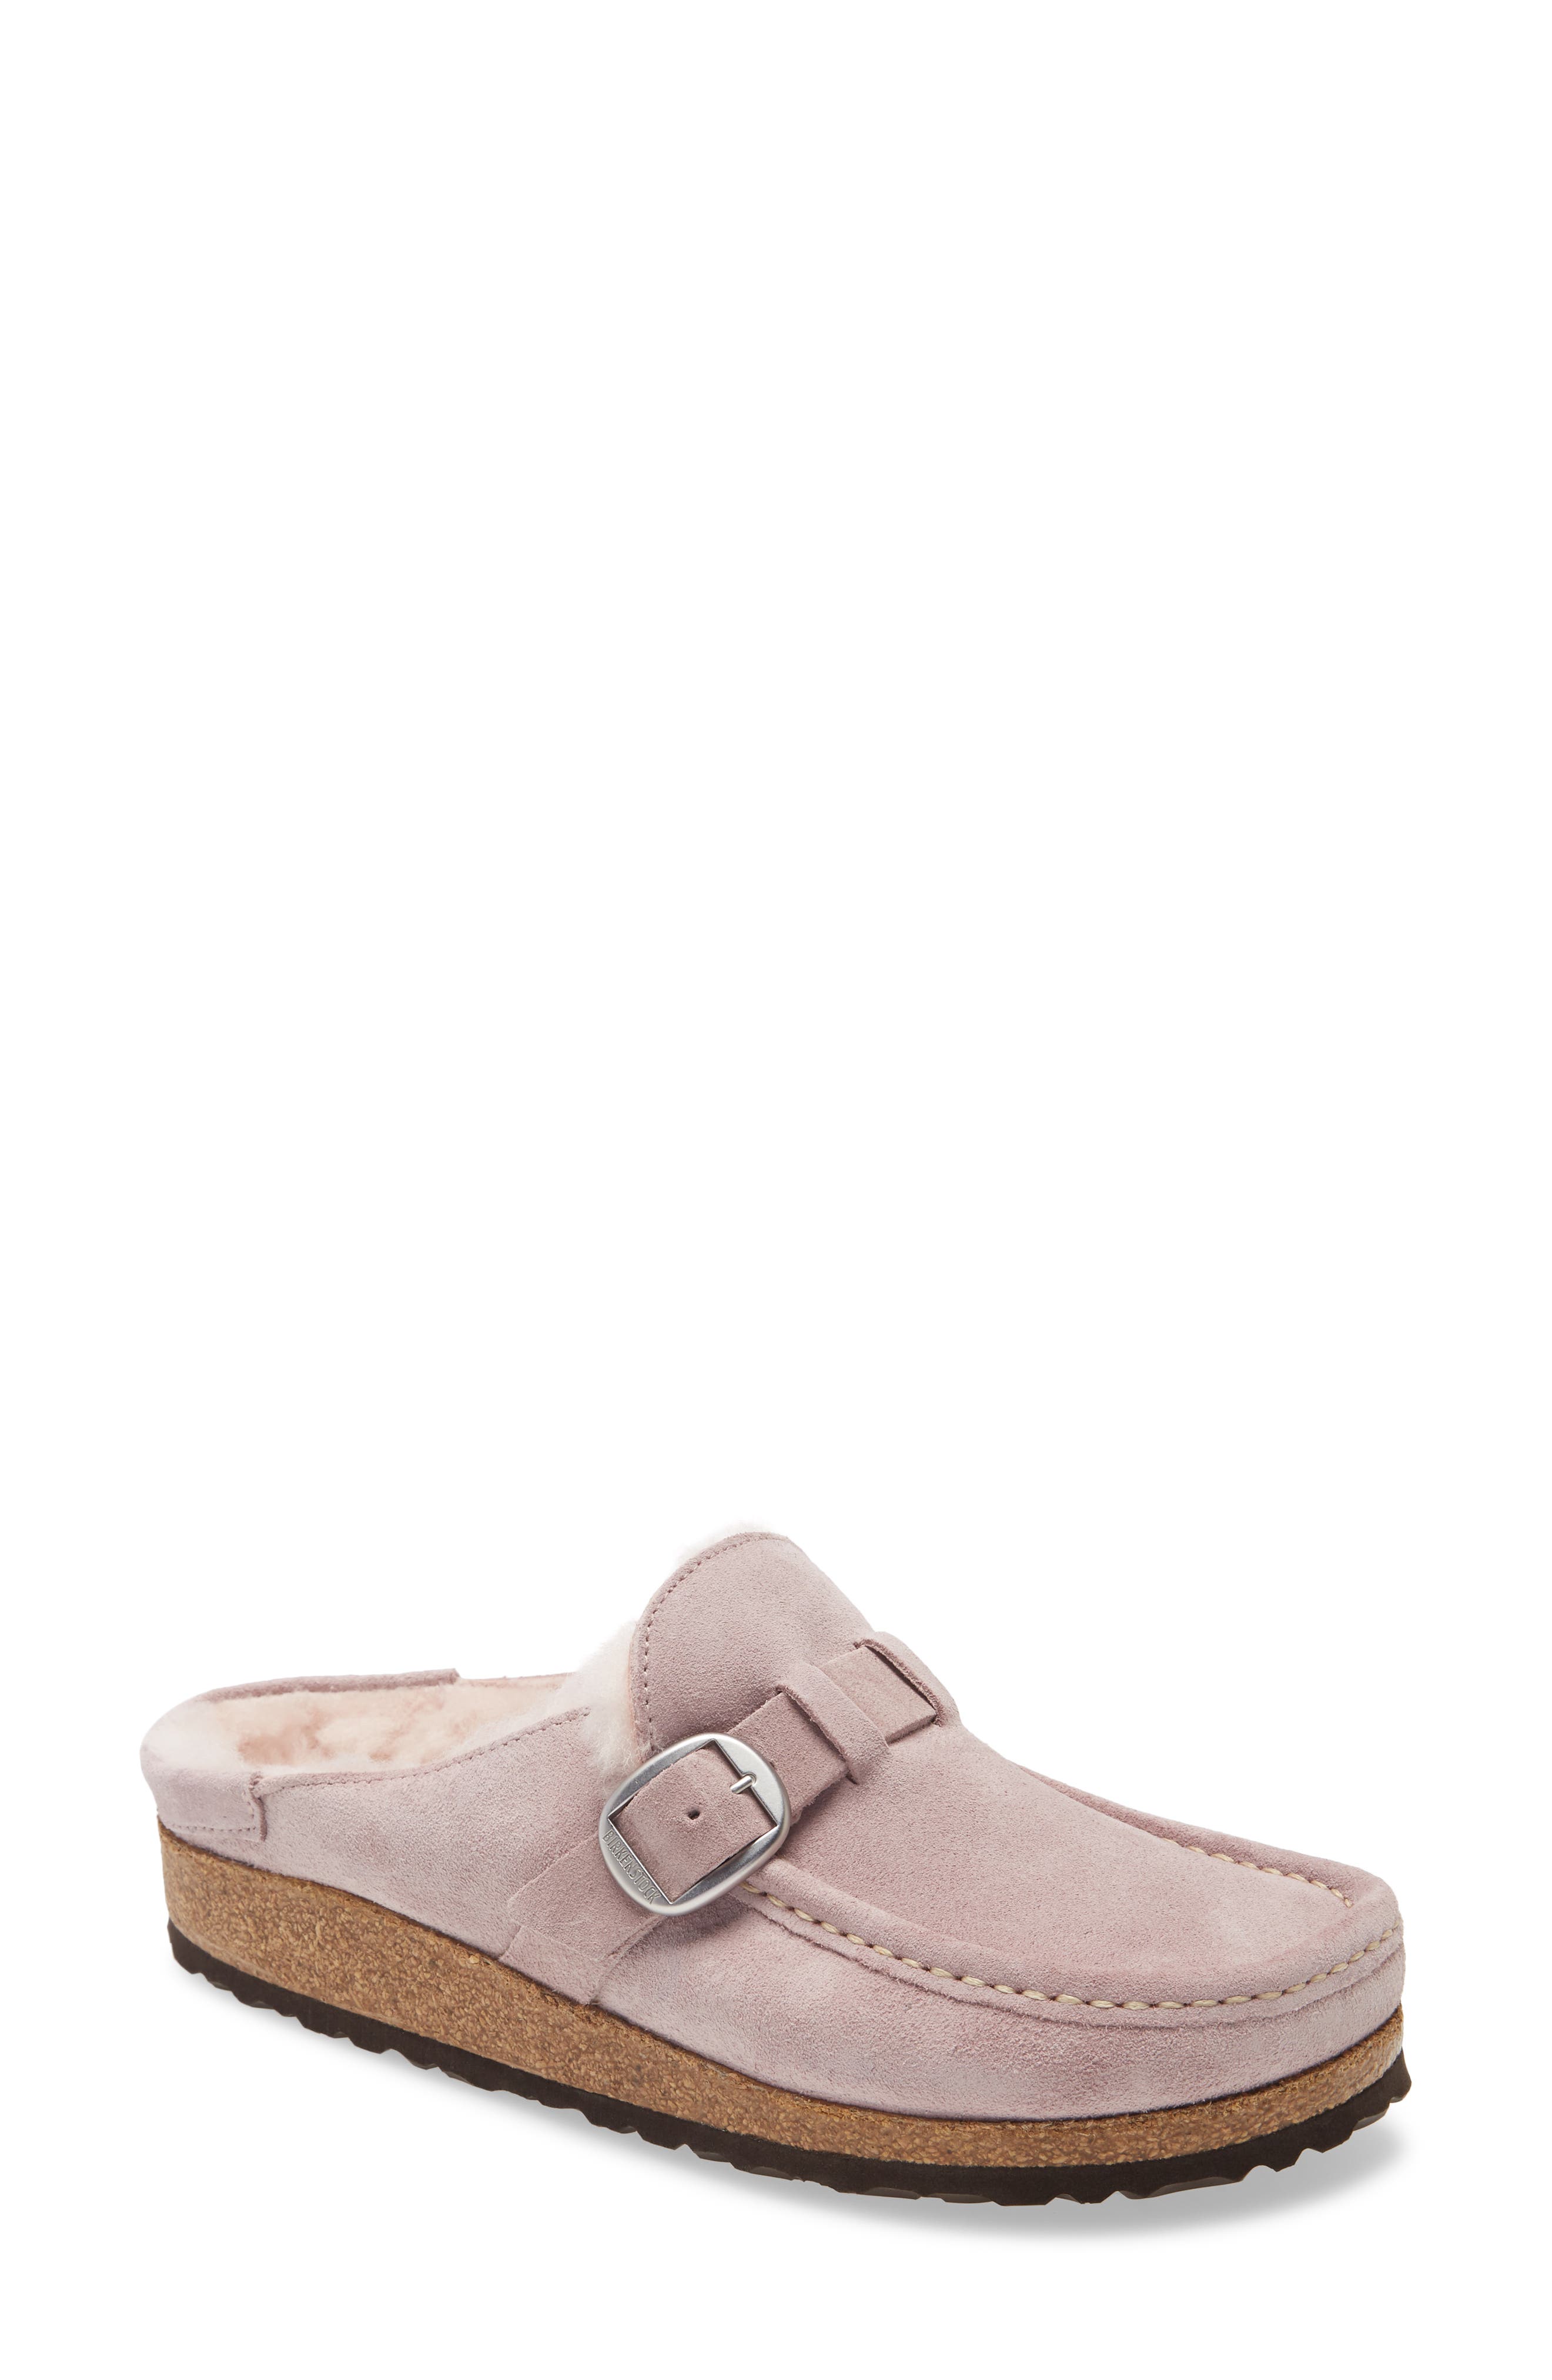 Women's Pink Fashion Trends: Shoes 